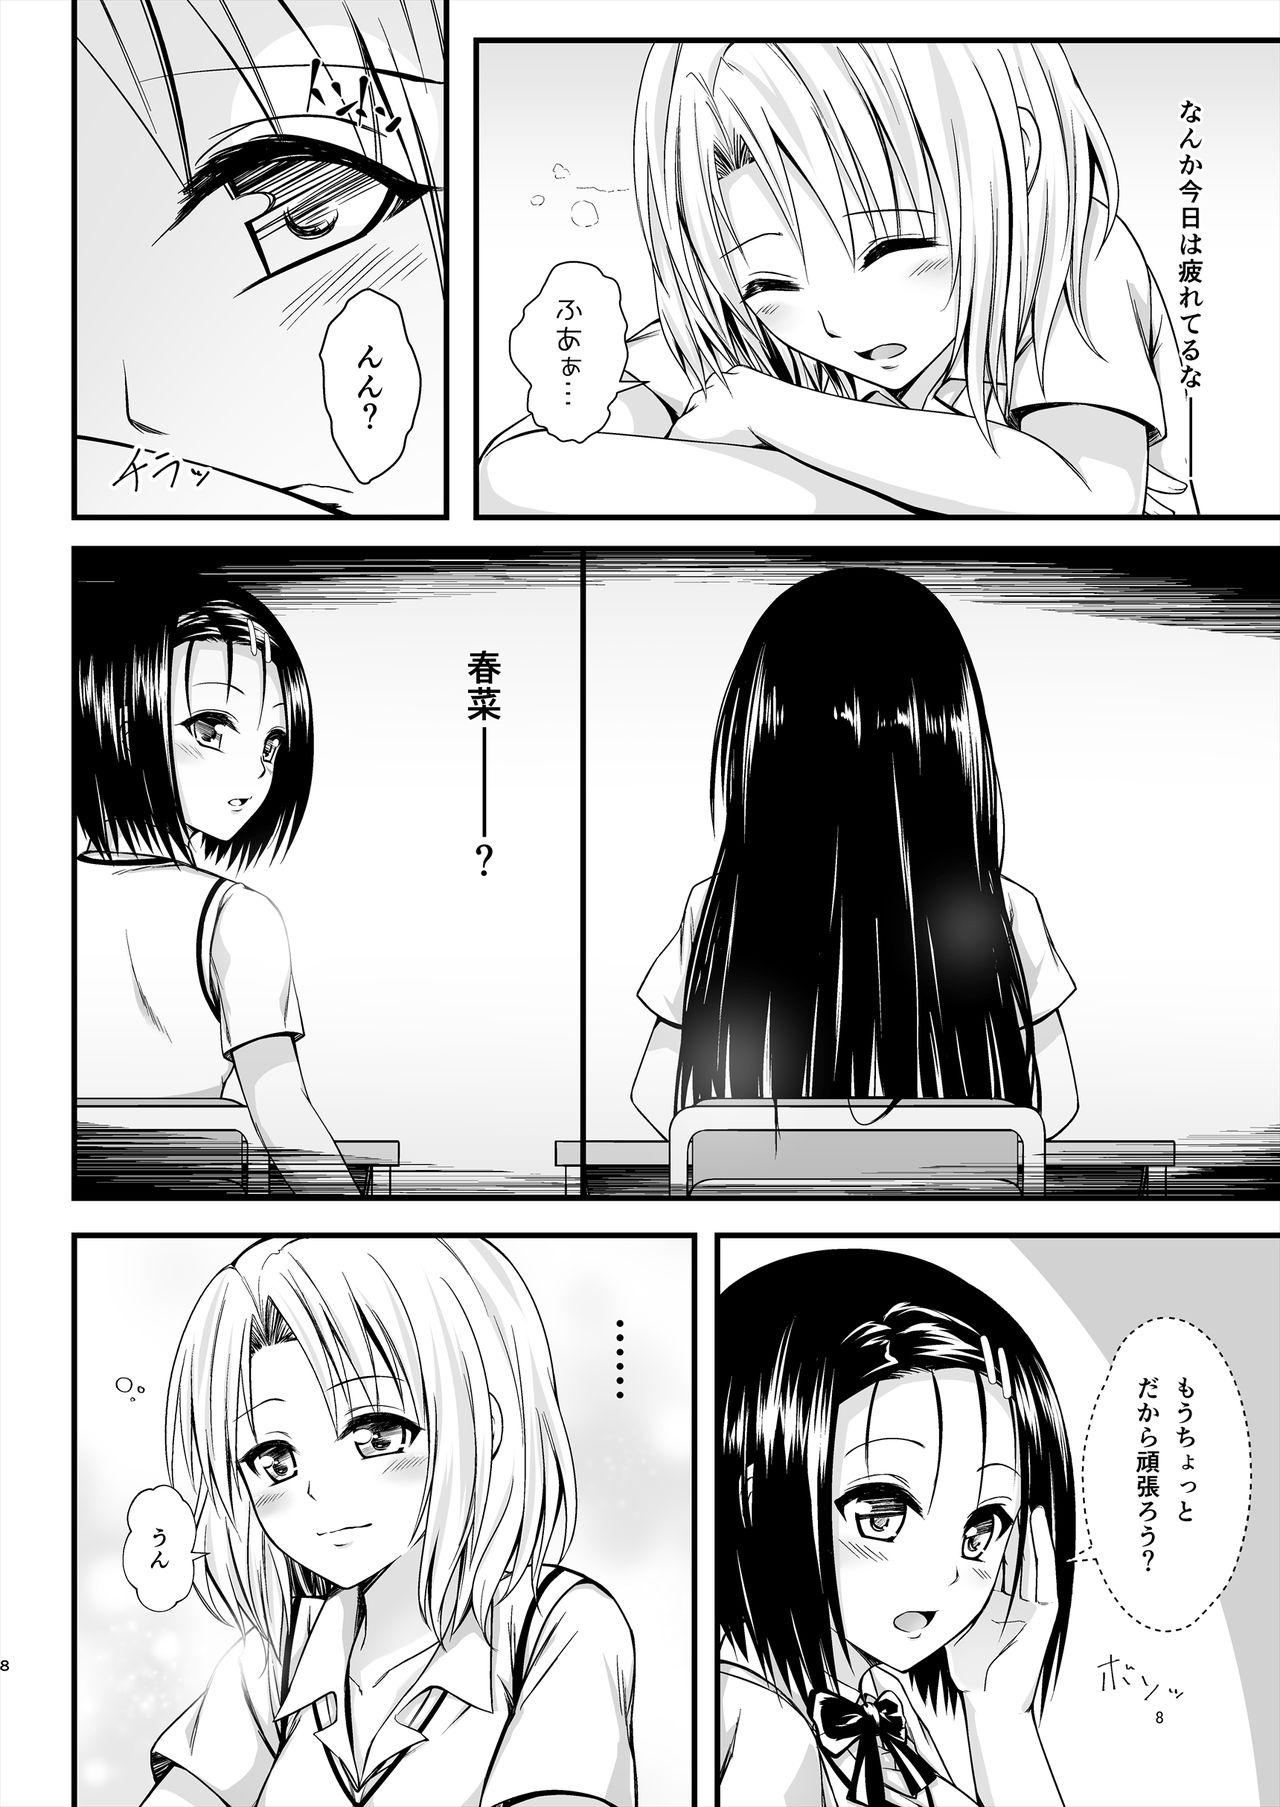 Tamil Risa Haru 4 - To love ru Submission - Page 8